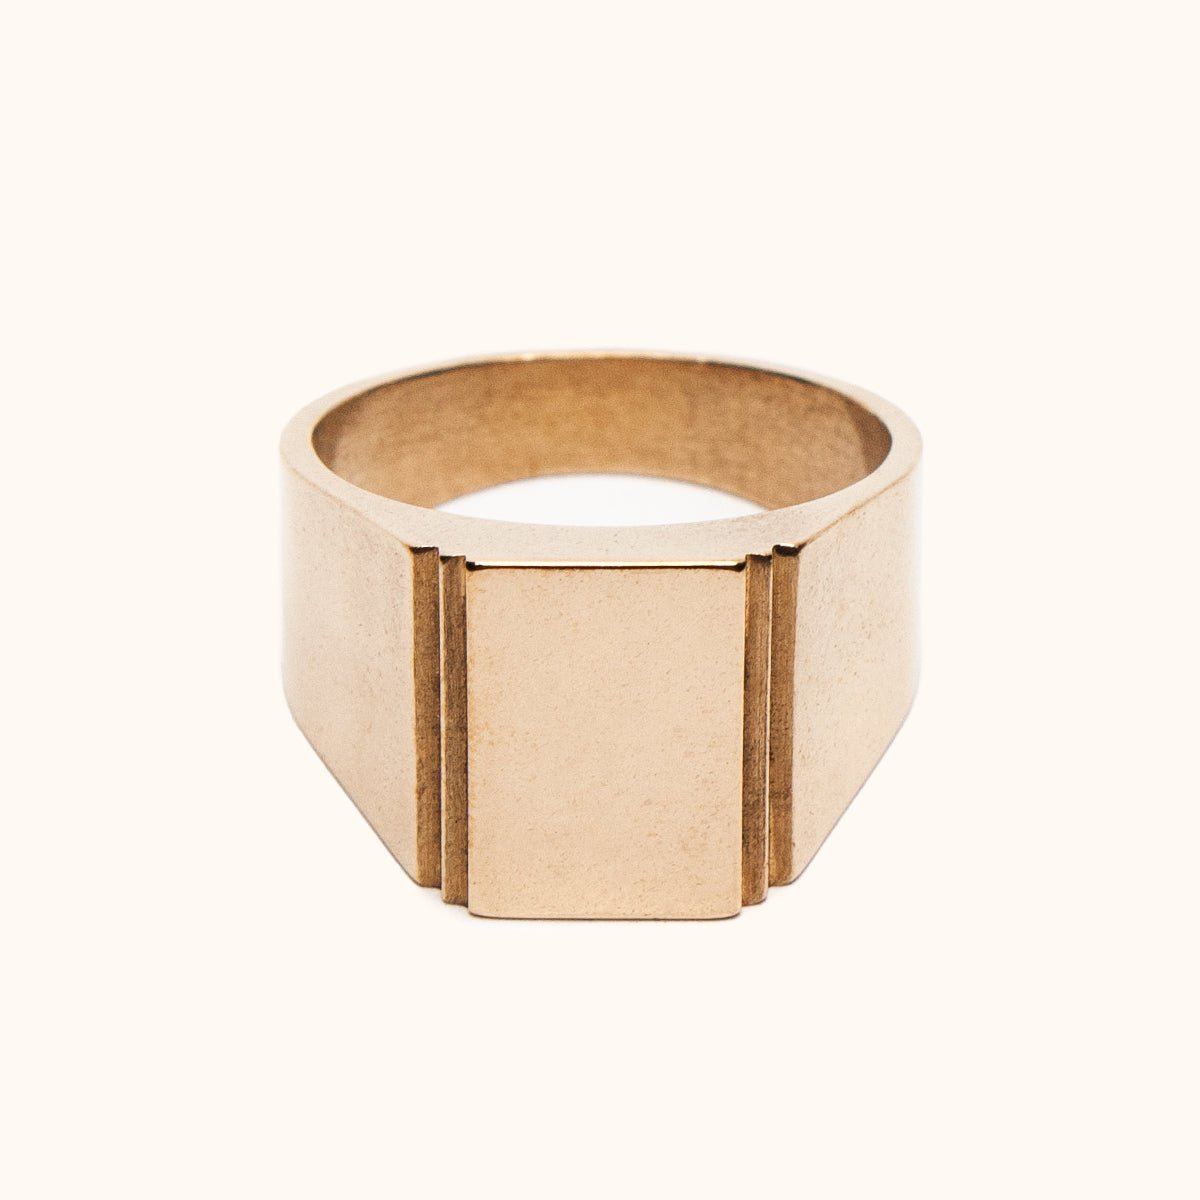 A wide bang rectangular signet ring with a stair step cut out design. Made of Bronze. The Suscita Ring is designed and handcrafted in Portland, Oregon.